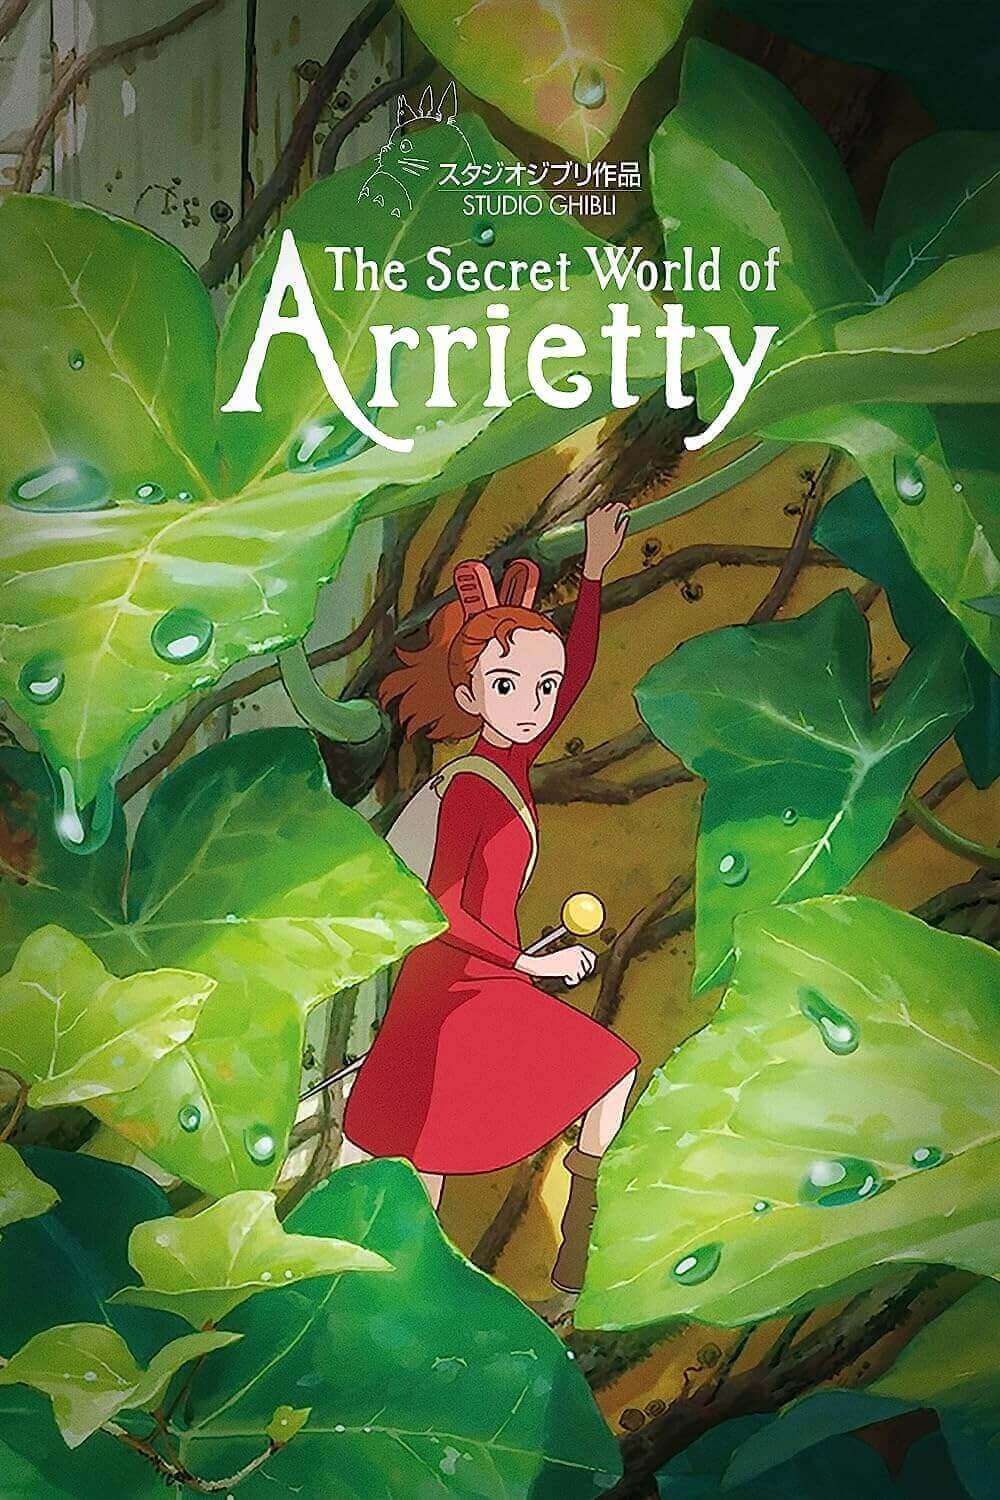 Watch The Secret World of Arrietty, it's one of the best Studio Ghibli movies and best G rated movie, perfect for 7+ year olds.